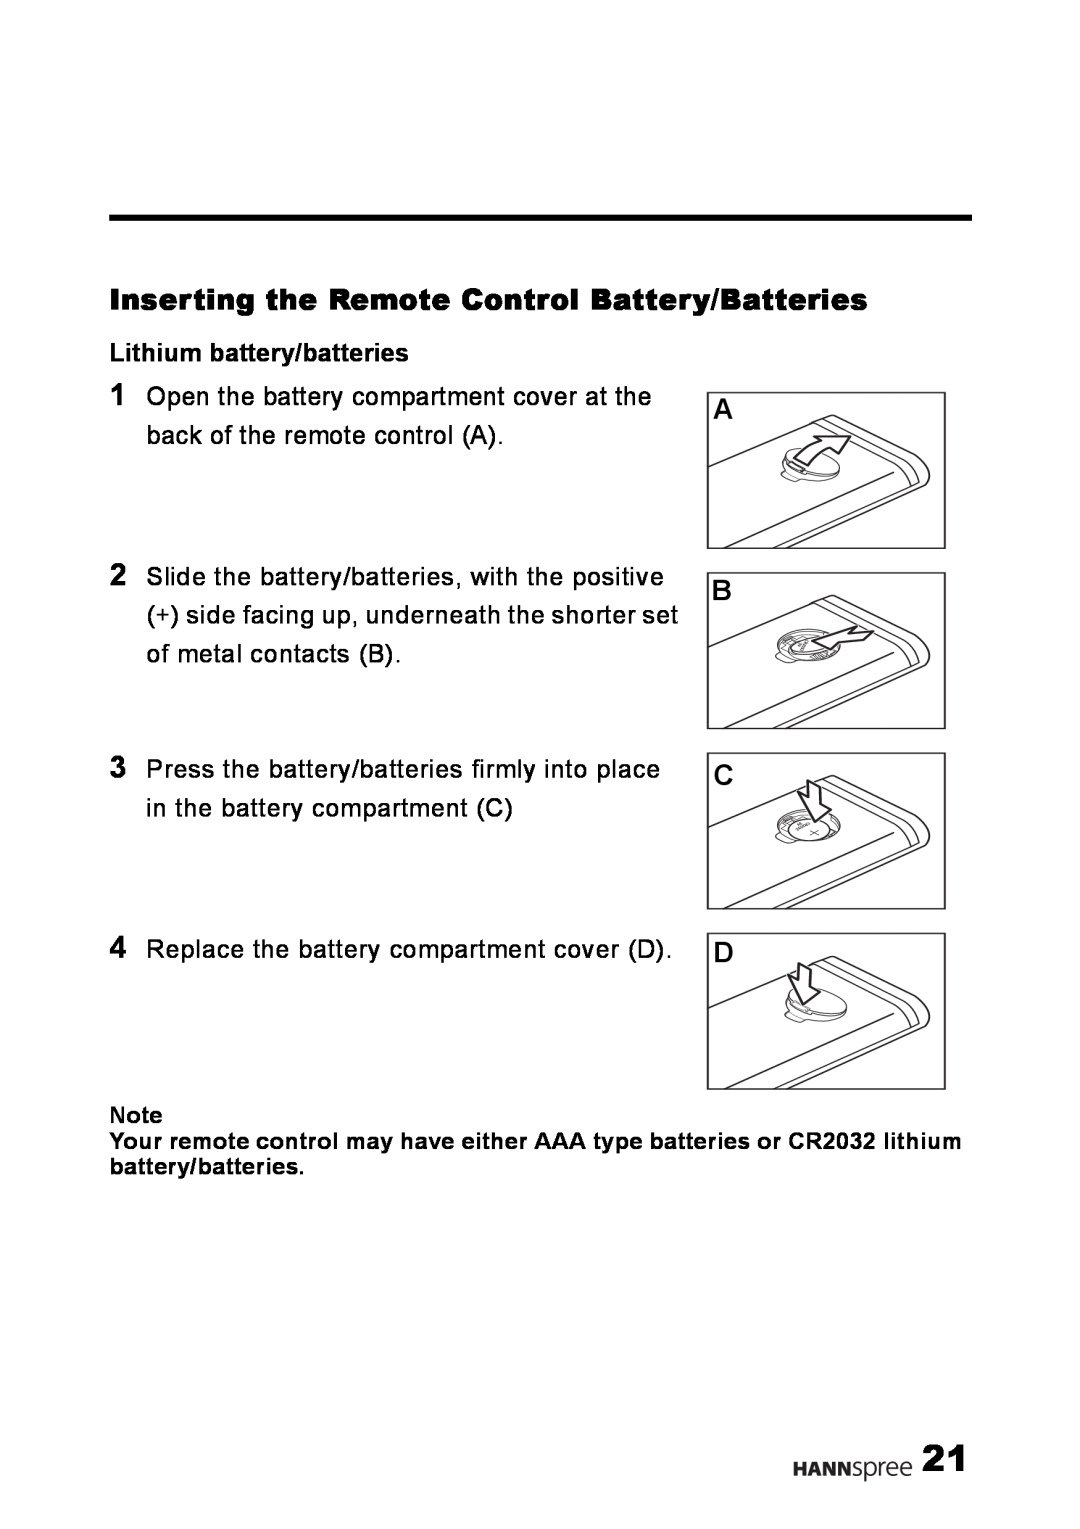 HANNspree LT09-10U1-000 user manual Inserting the Remote Control Battery/Batteries 